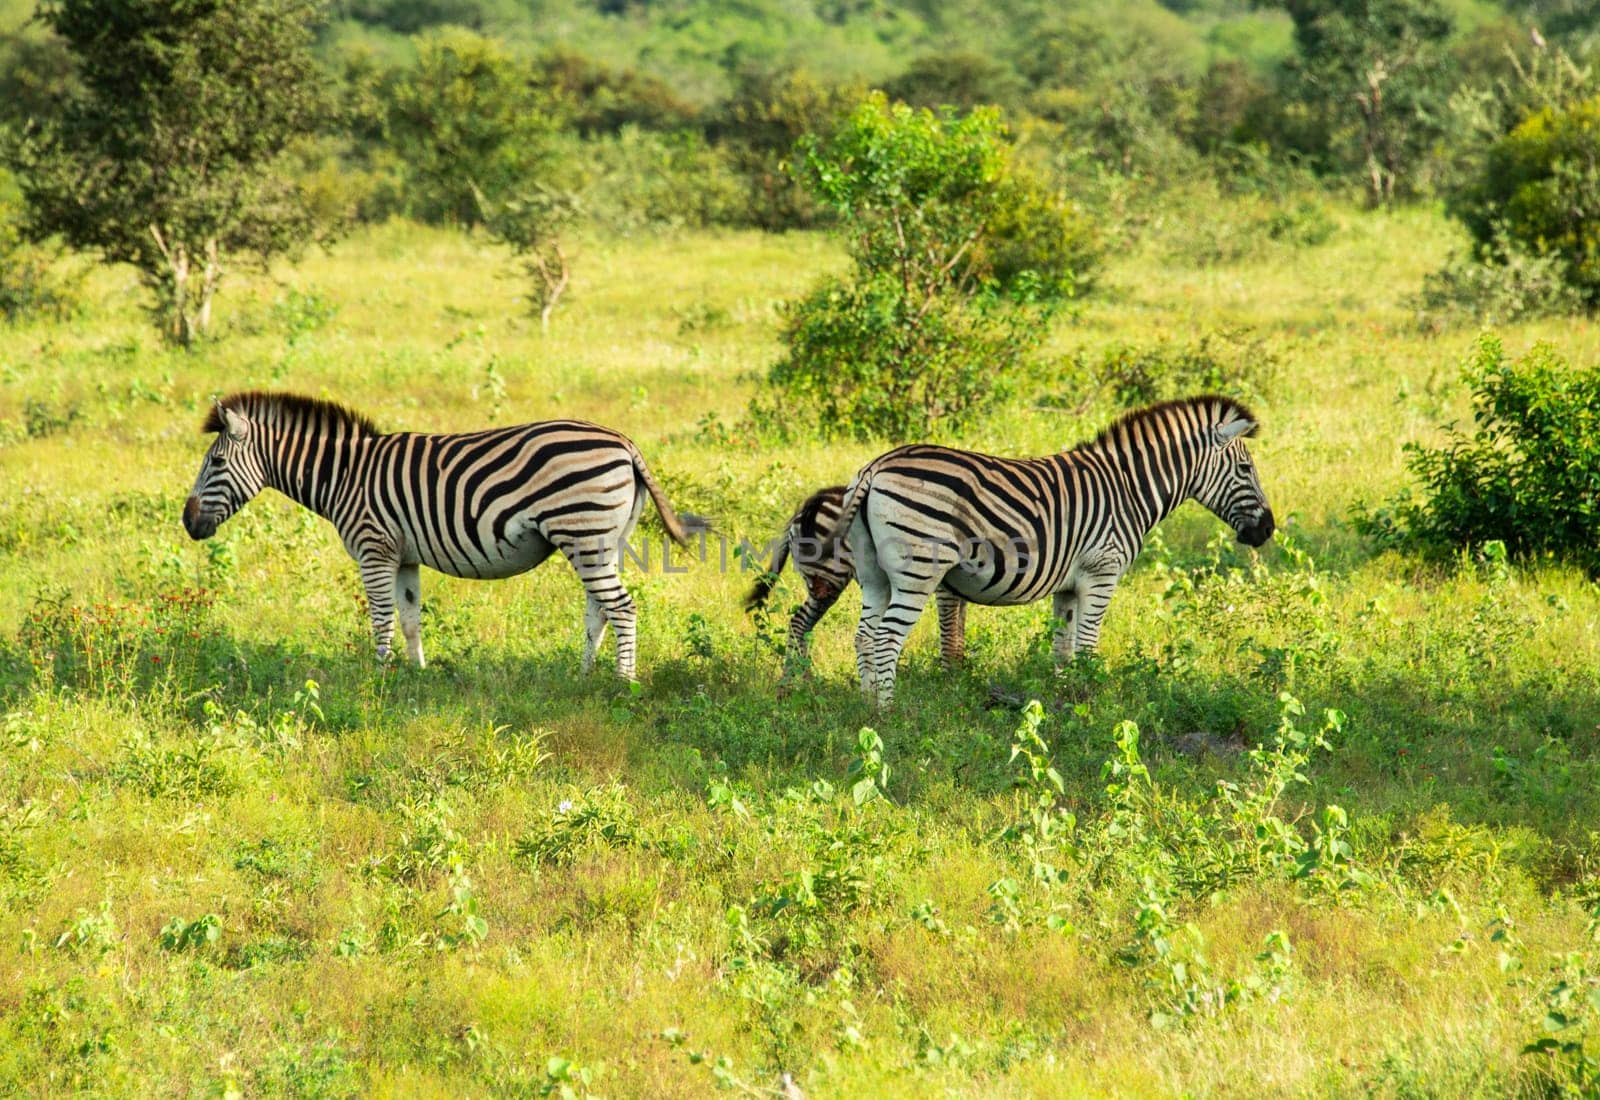 zebra wild animals in kruger national park in south africa in the green field betweens the grass plants and trees